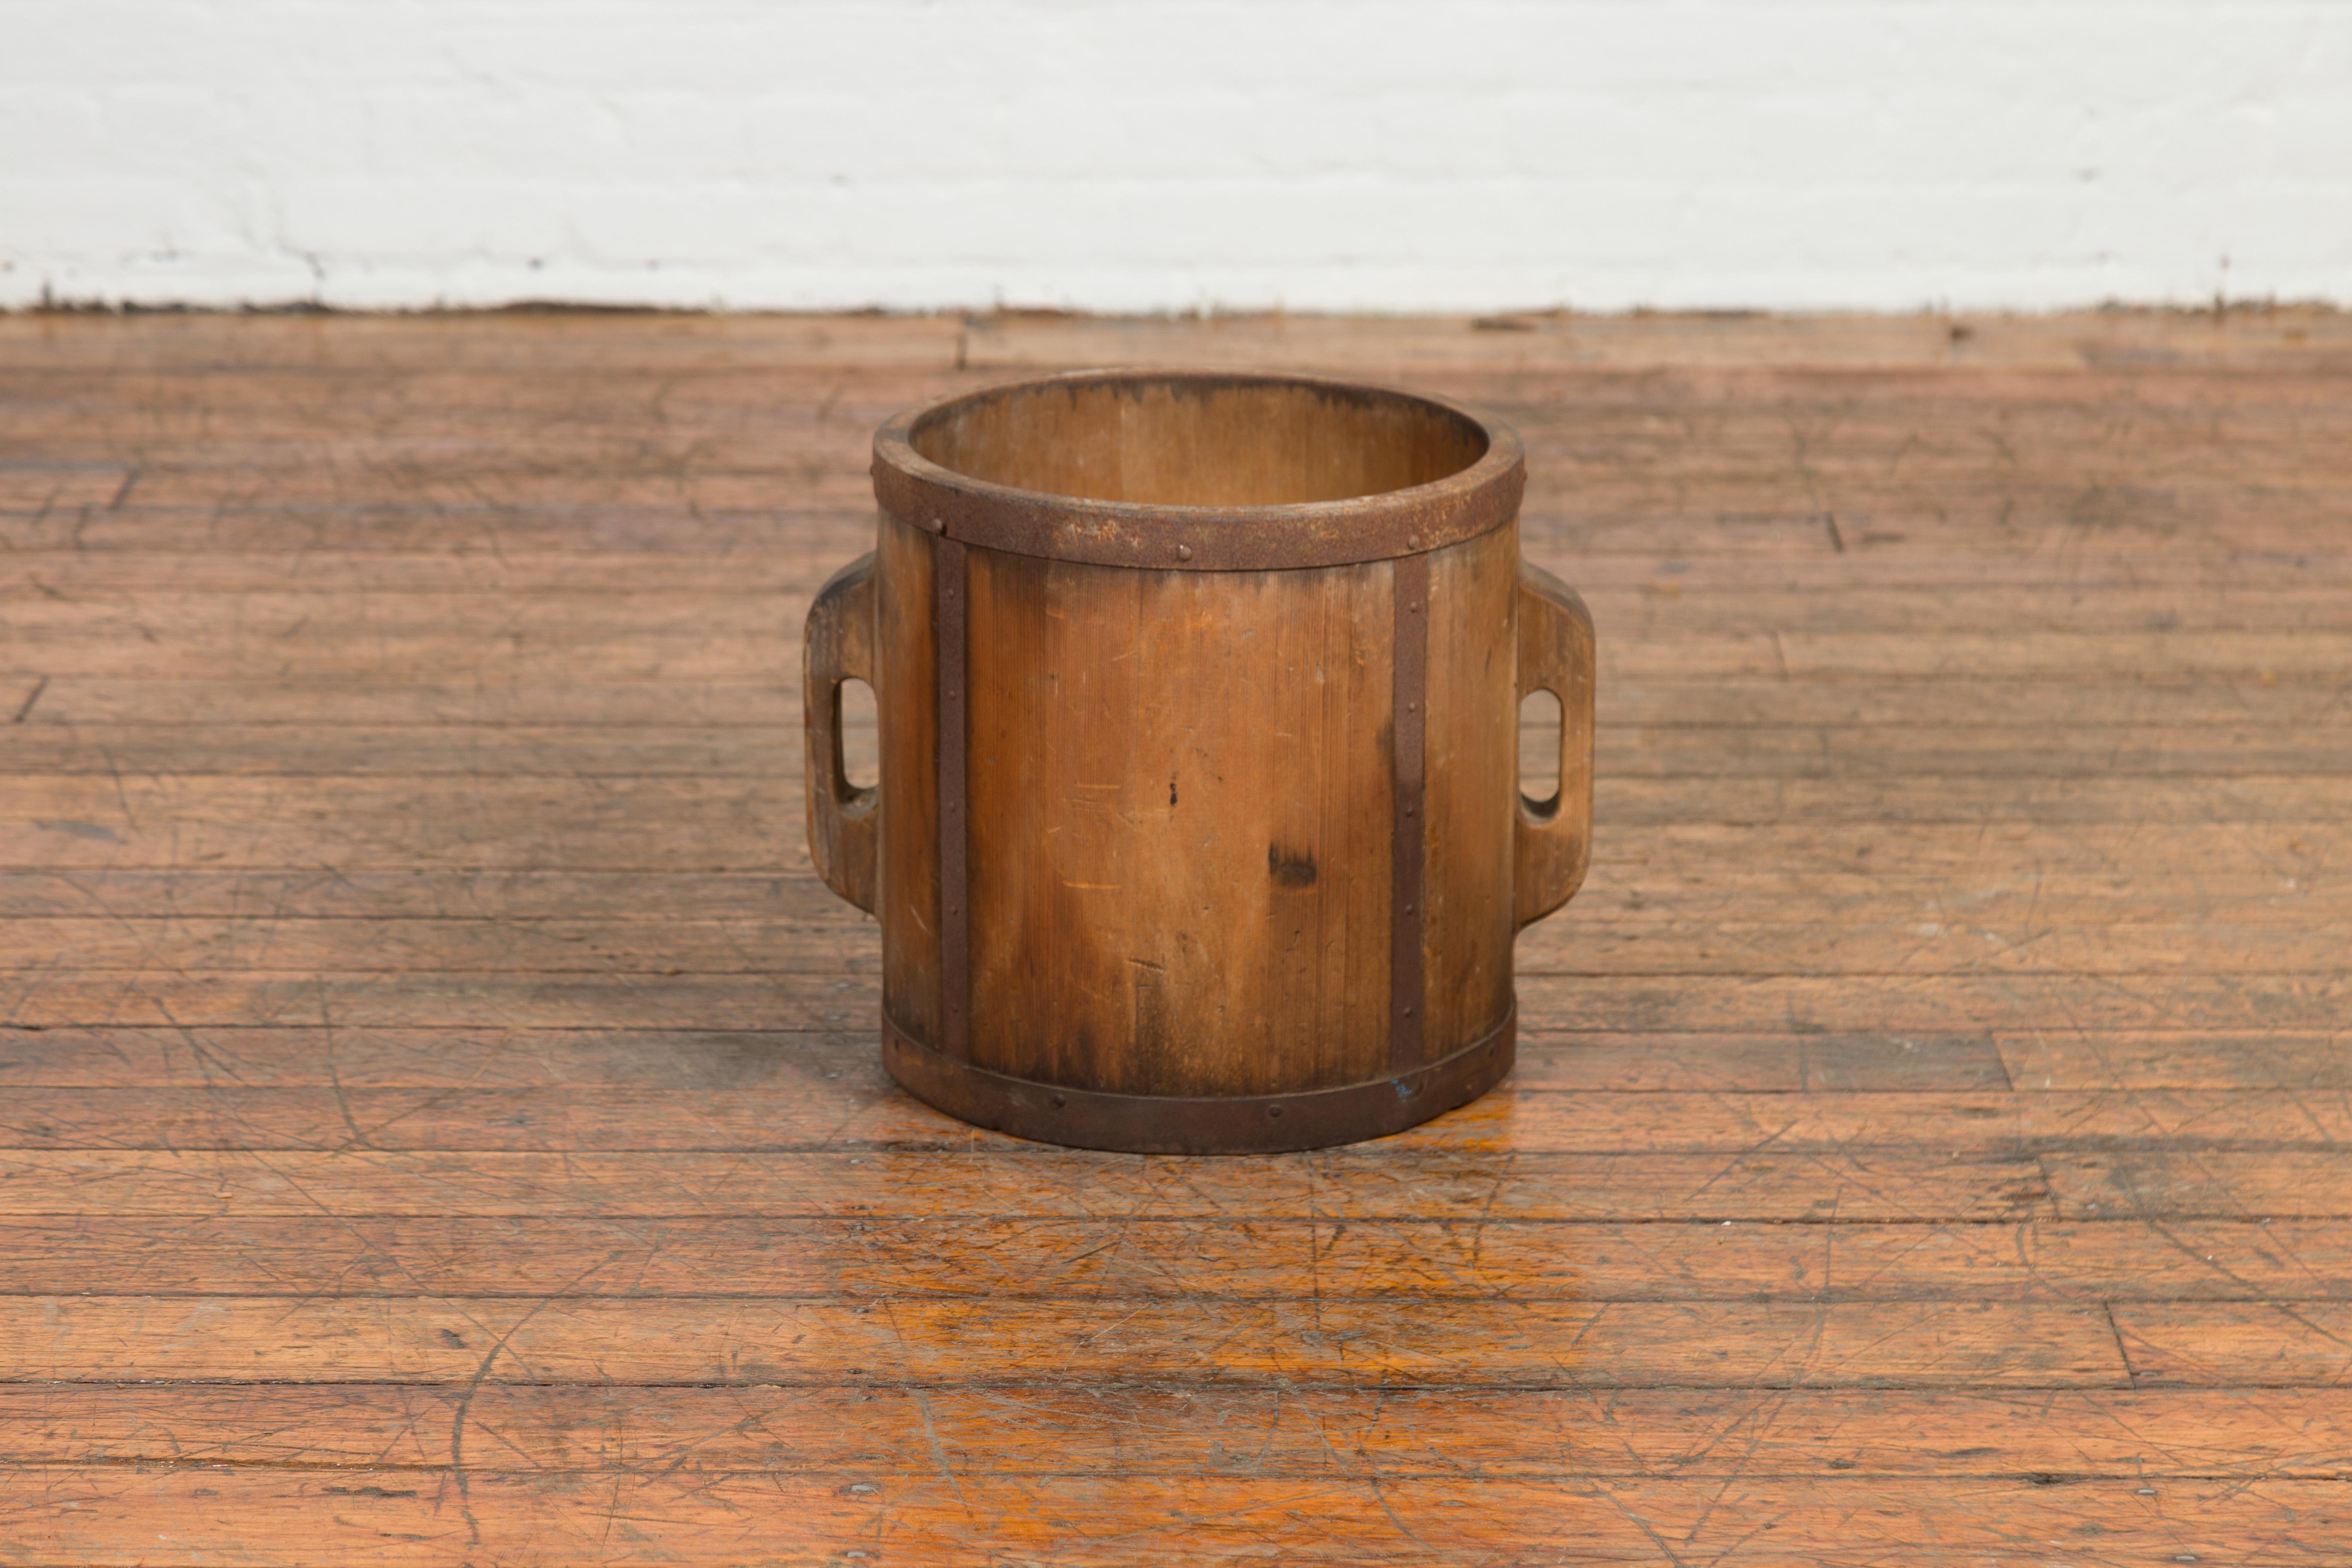 20th Century Vintage Chinese Grain Measuring Cup with Metal Braces and Lateral Handles